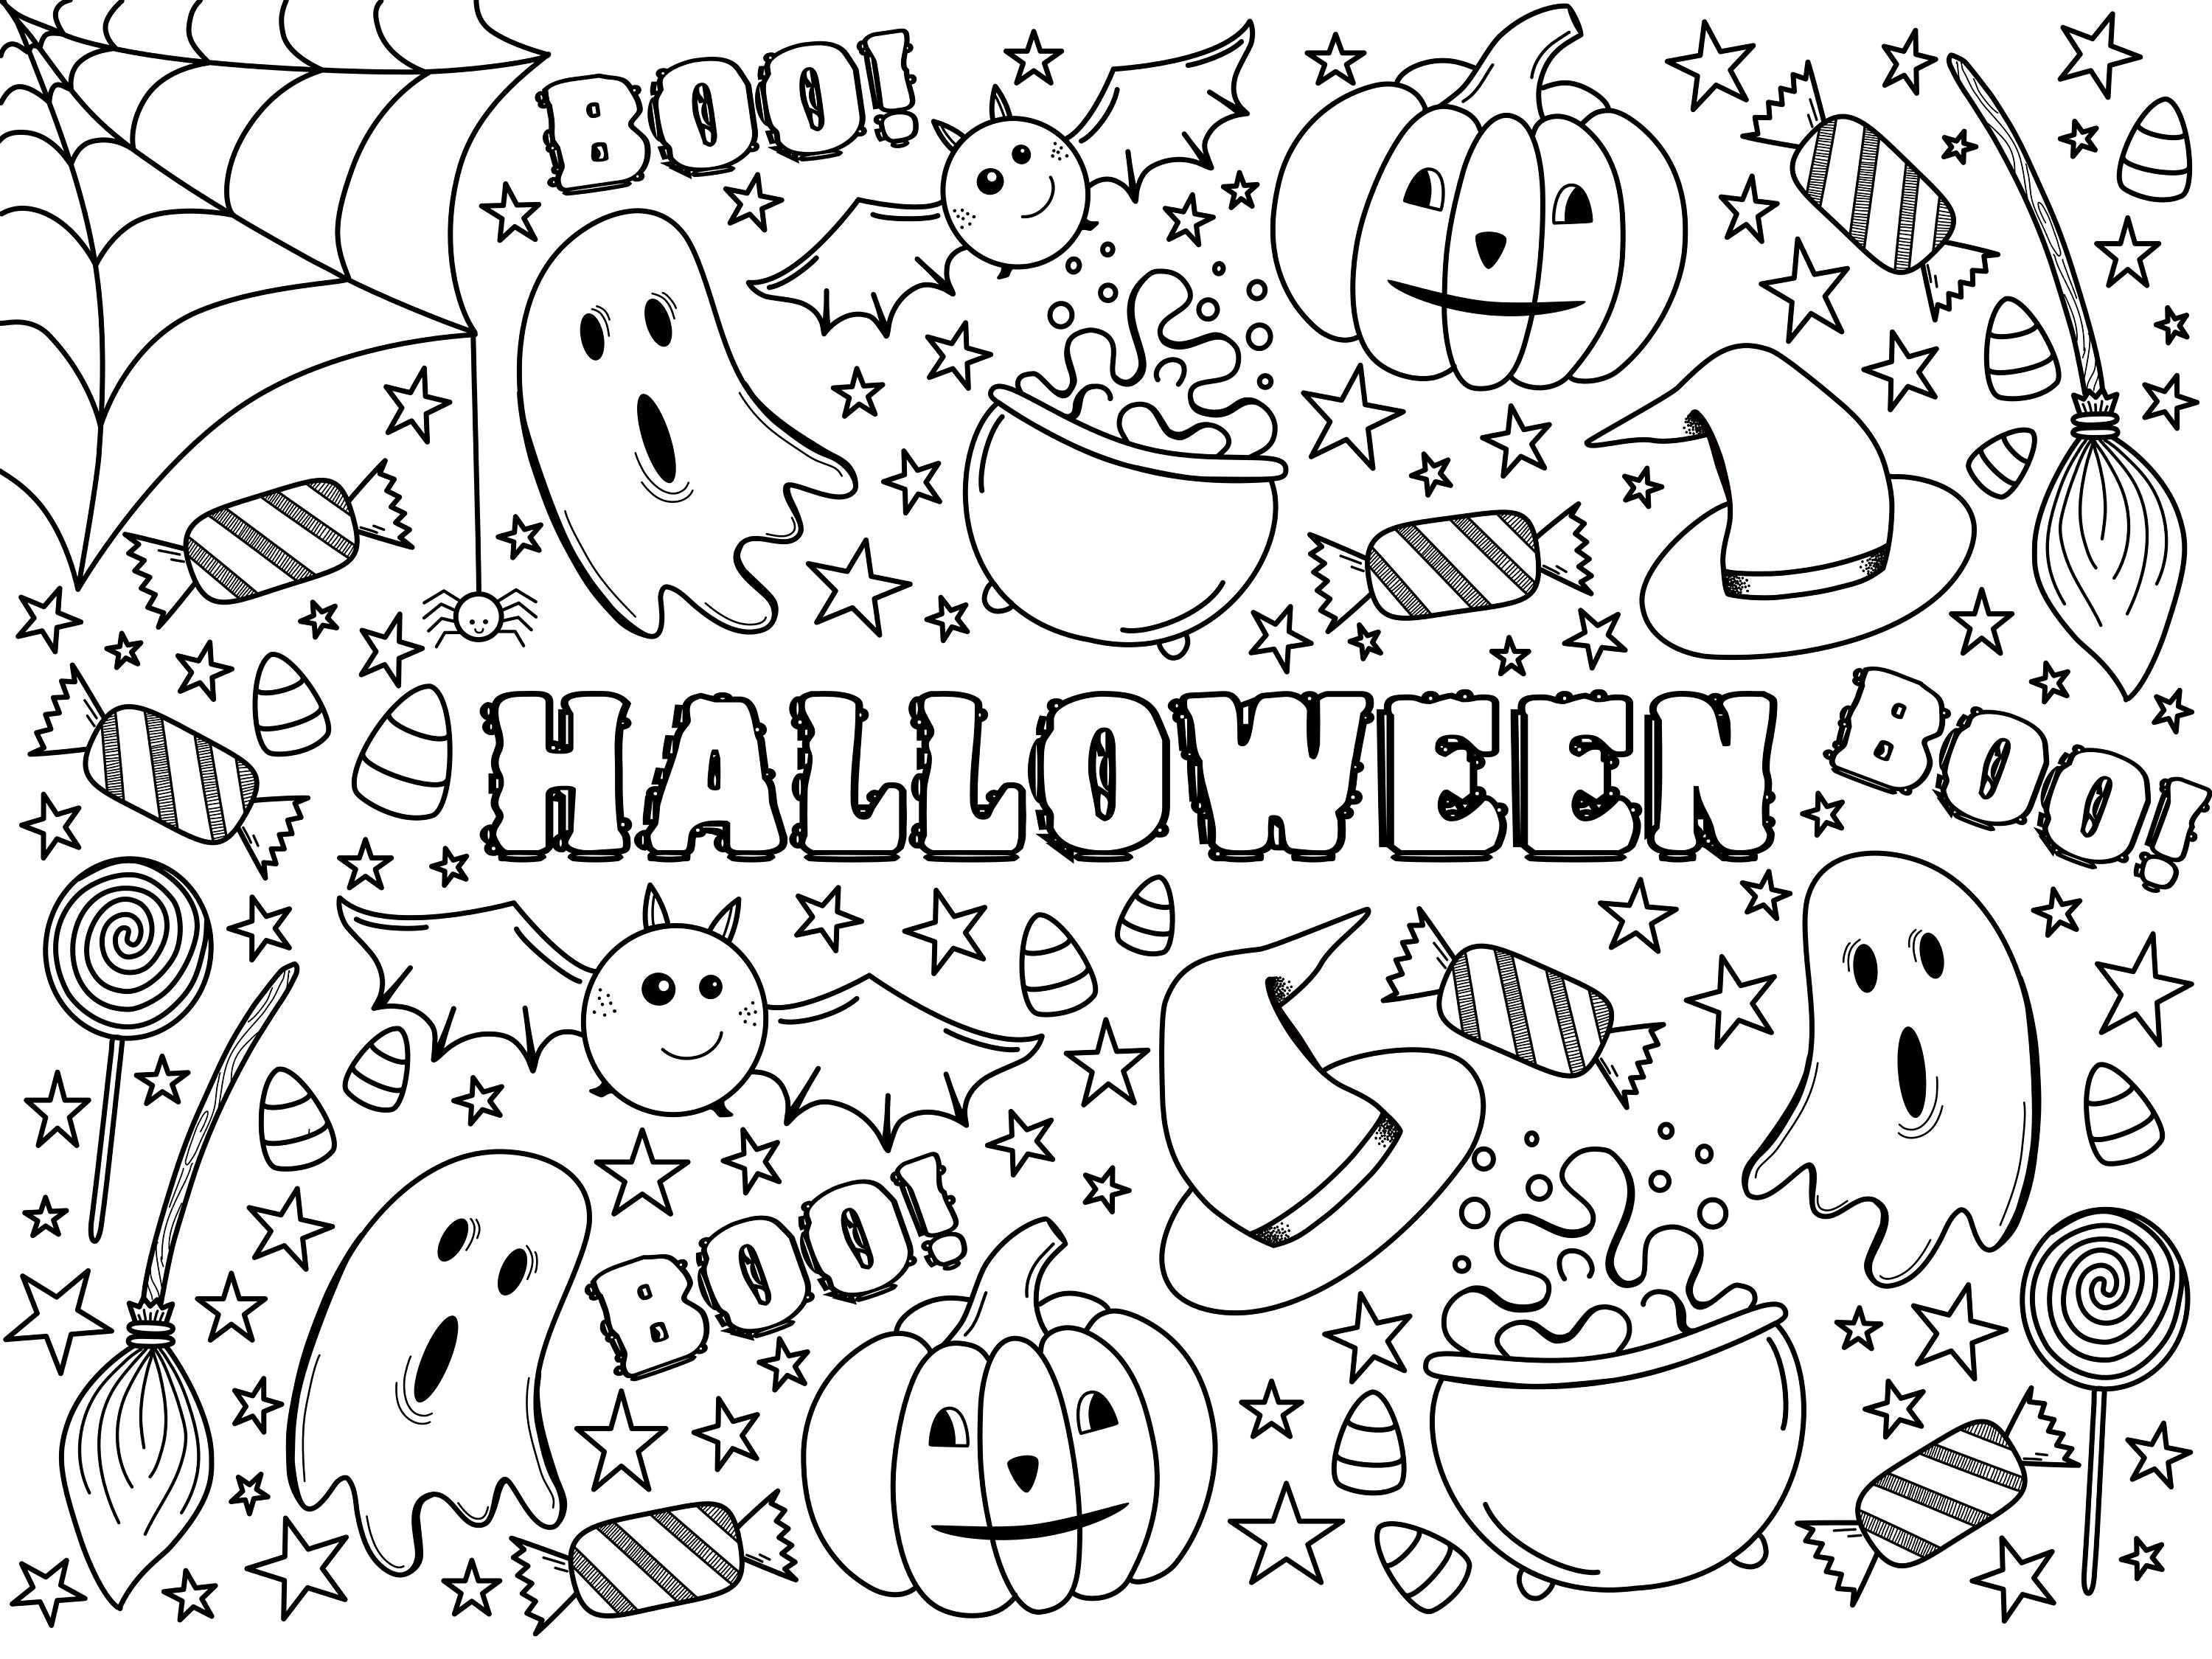 GIANT Halloween Coloring Page digital Download - Etsy